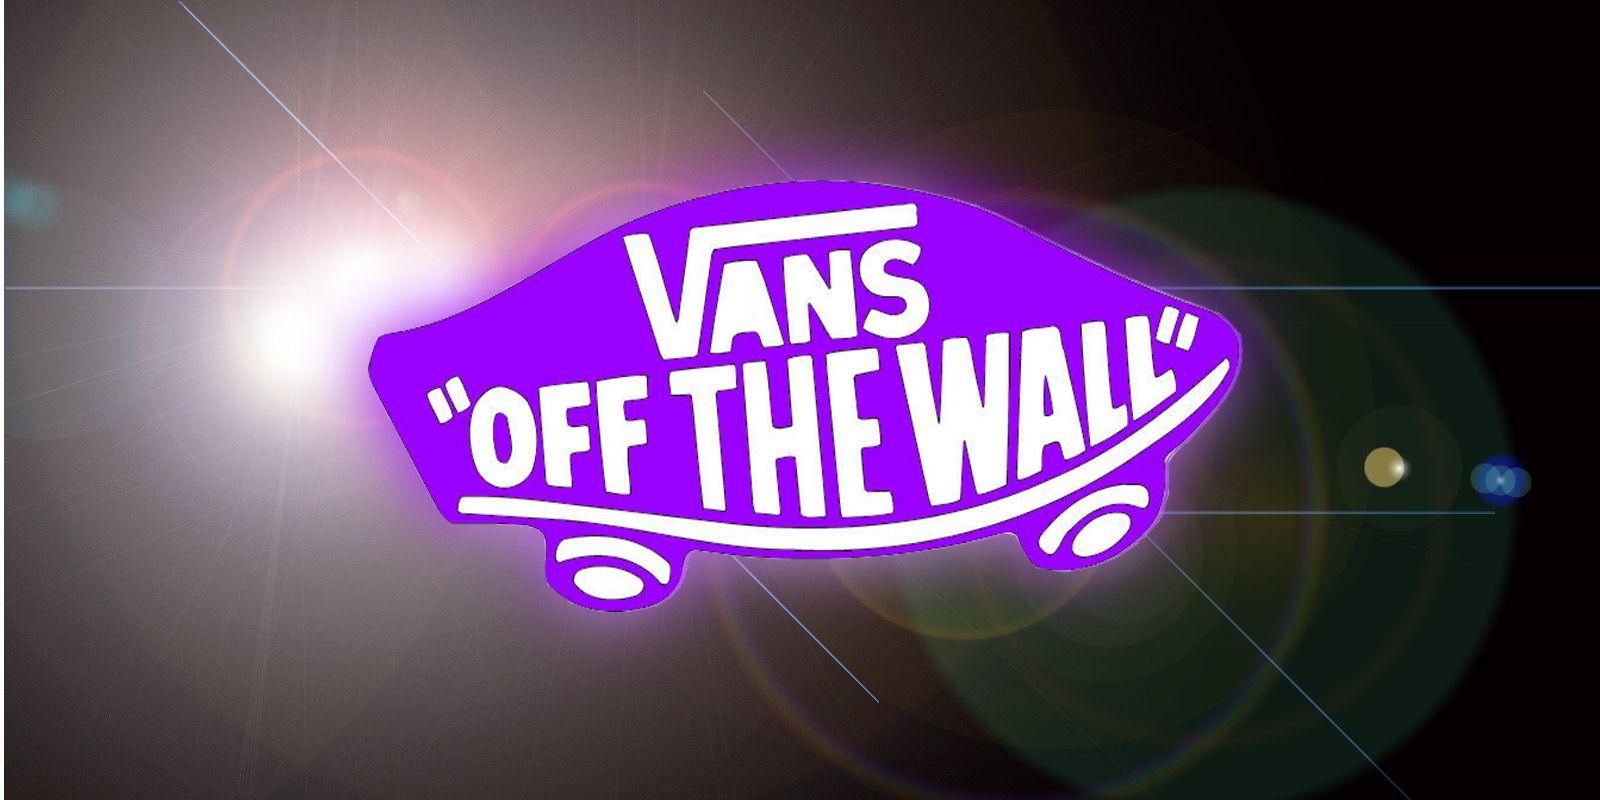 Vans Off The Wall Logos Background Wallpaper. I HD Image